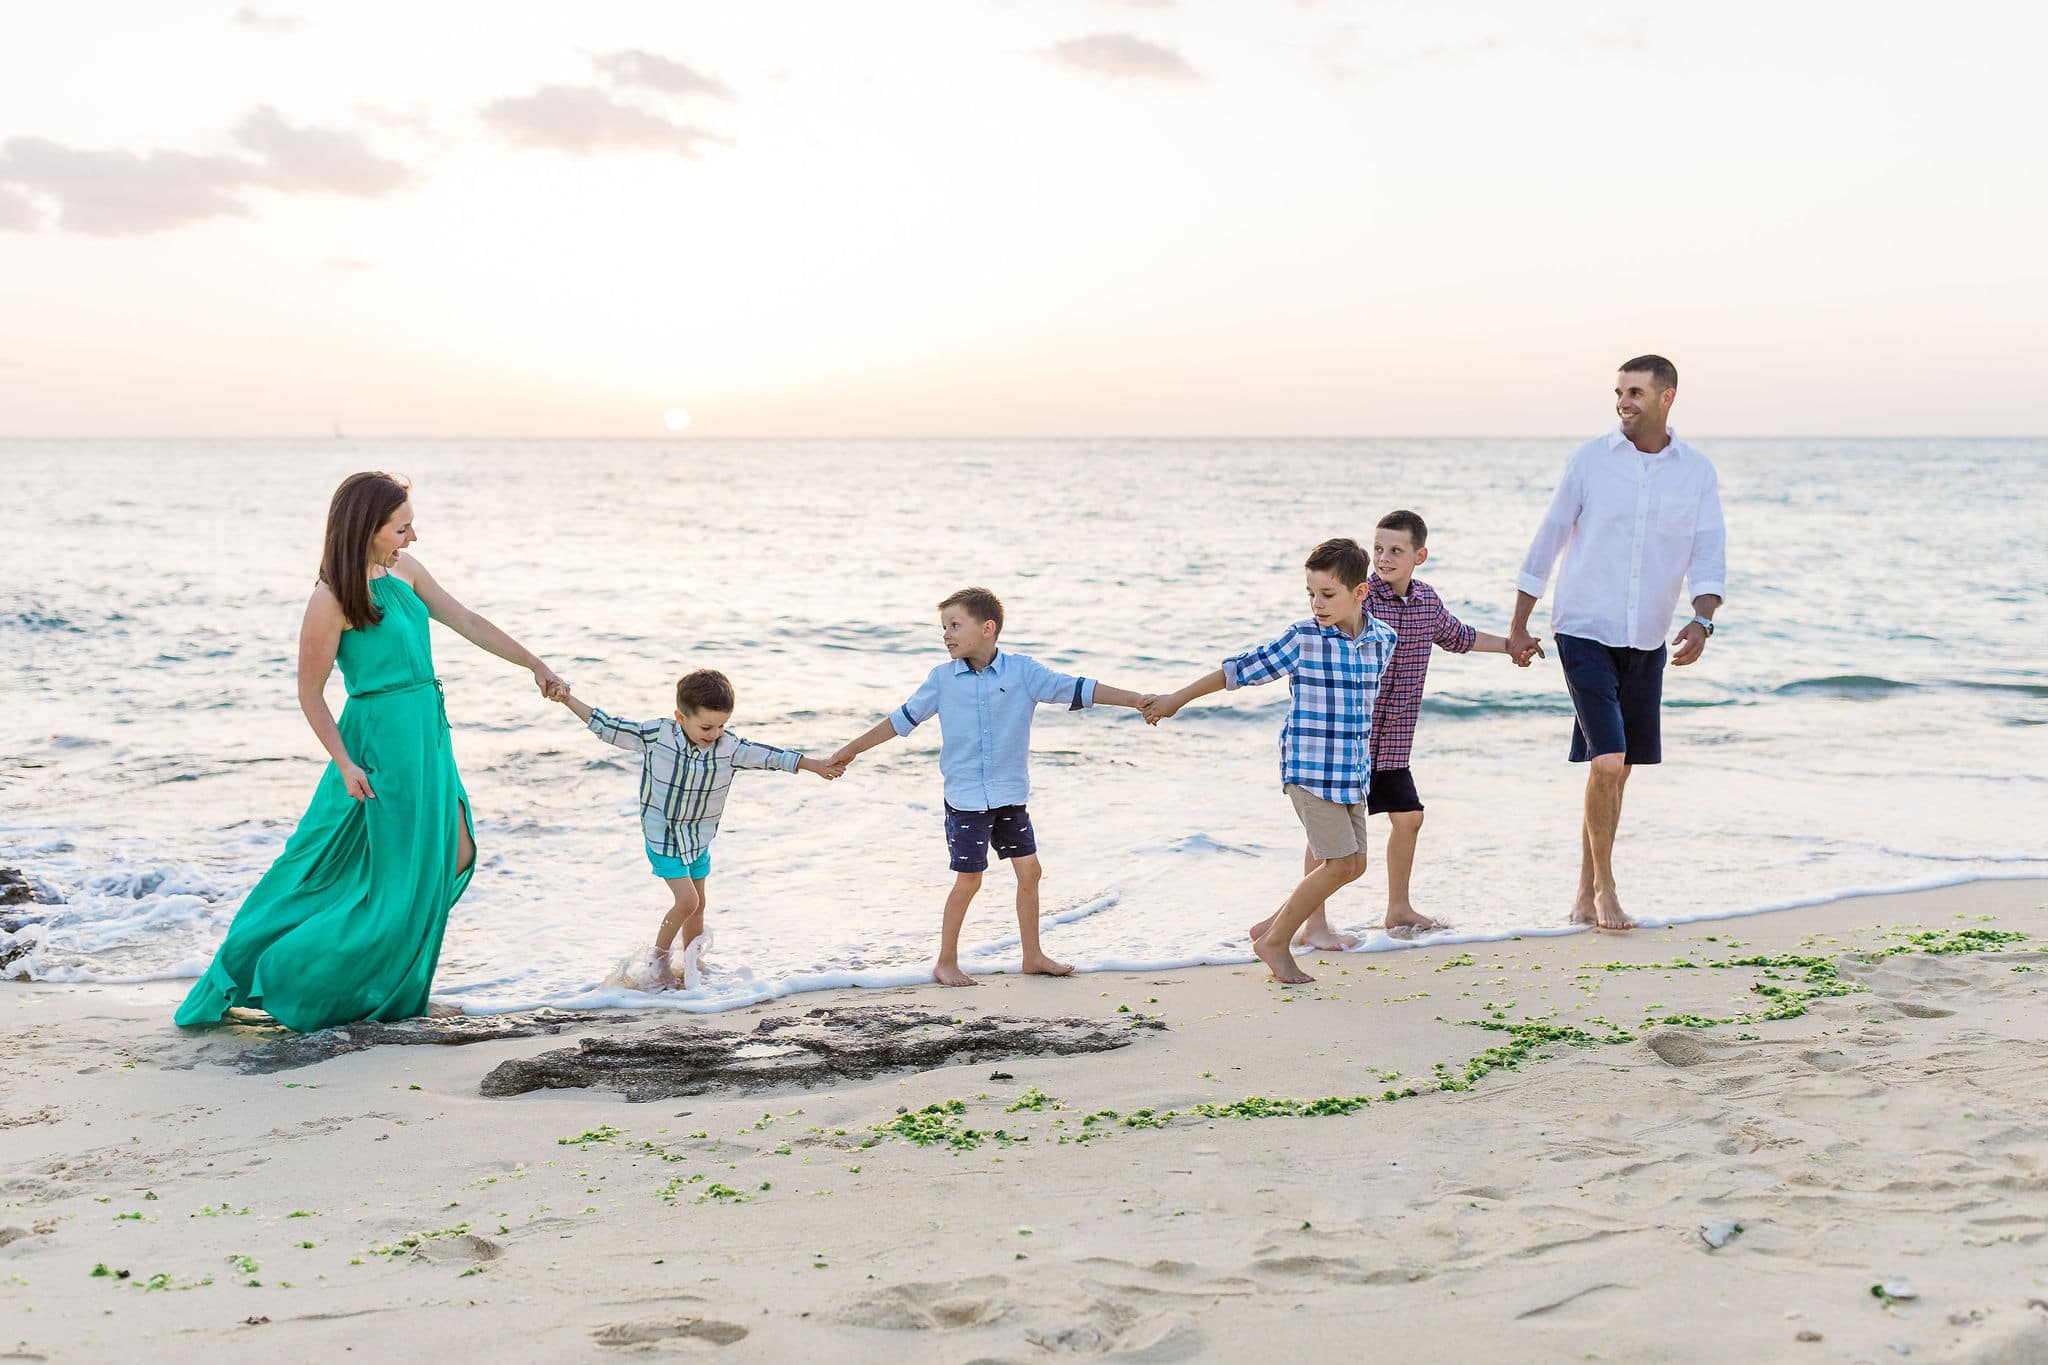 How to ruin your photo session - What not to do for your family photos